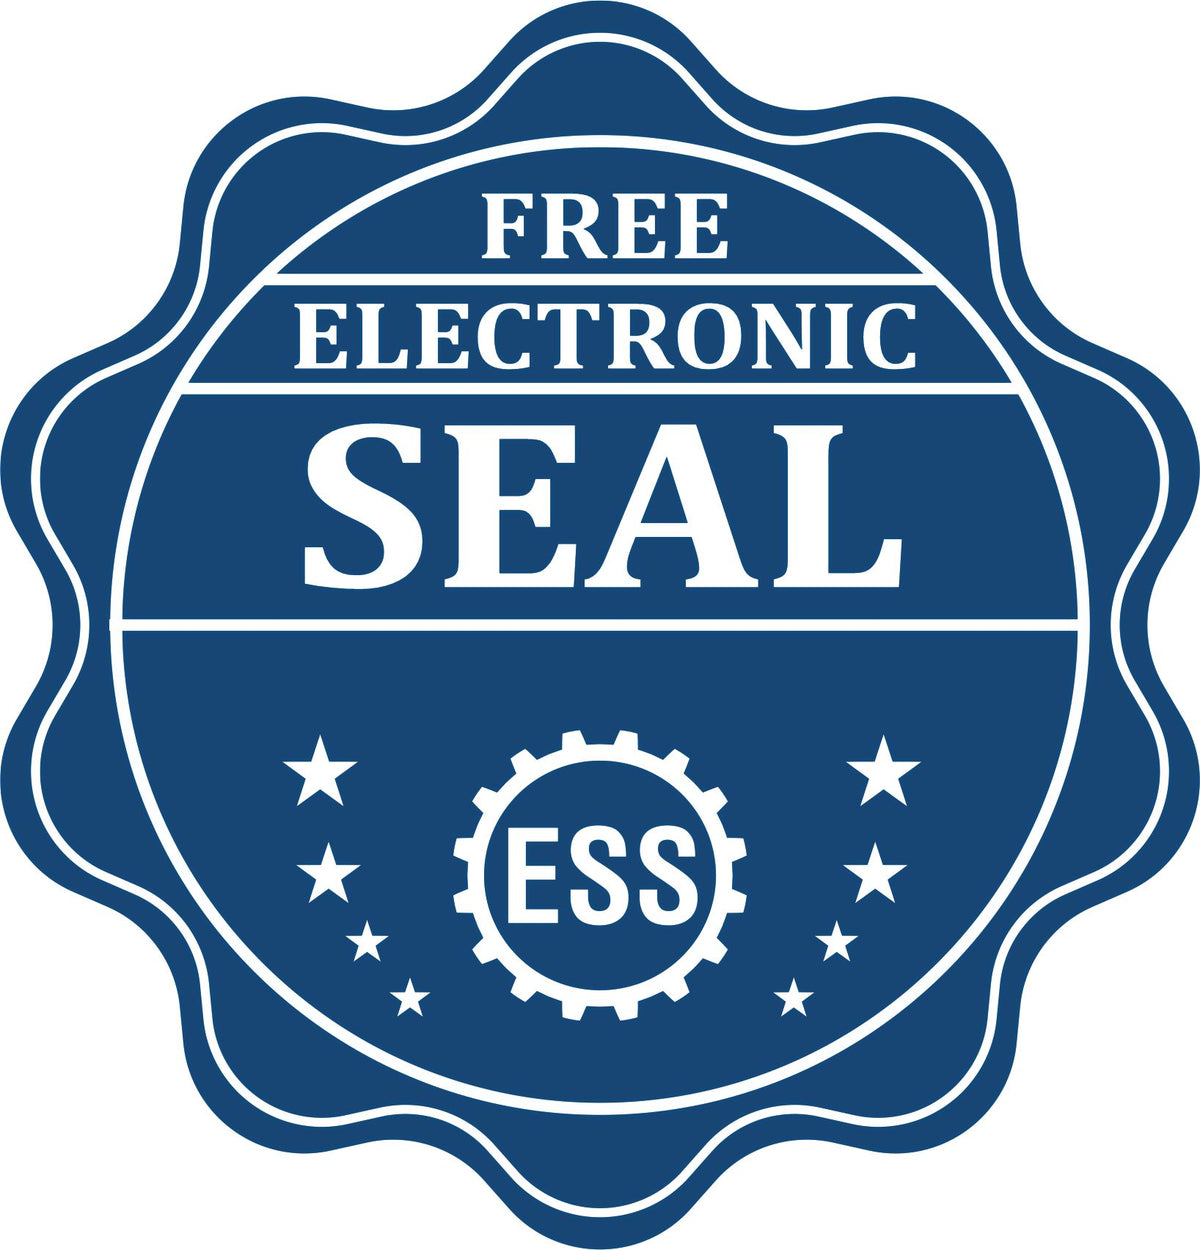 A badge showing a free electronic seal for the MaxLight Premium Pre-Inked Colorado Rectangular Notarial Stamp with stars and the ESS gear on the emblem.